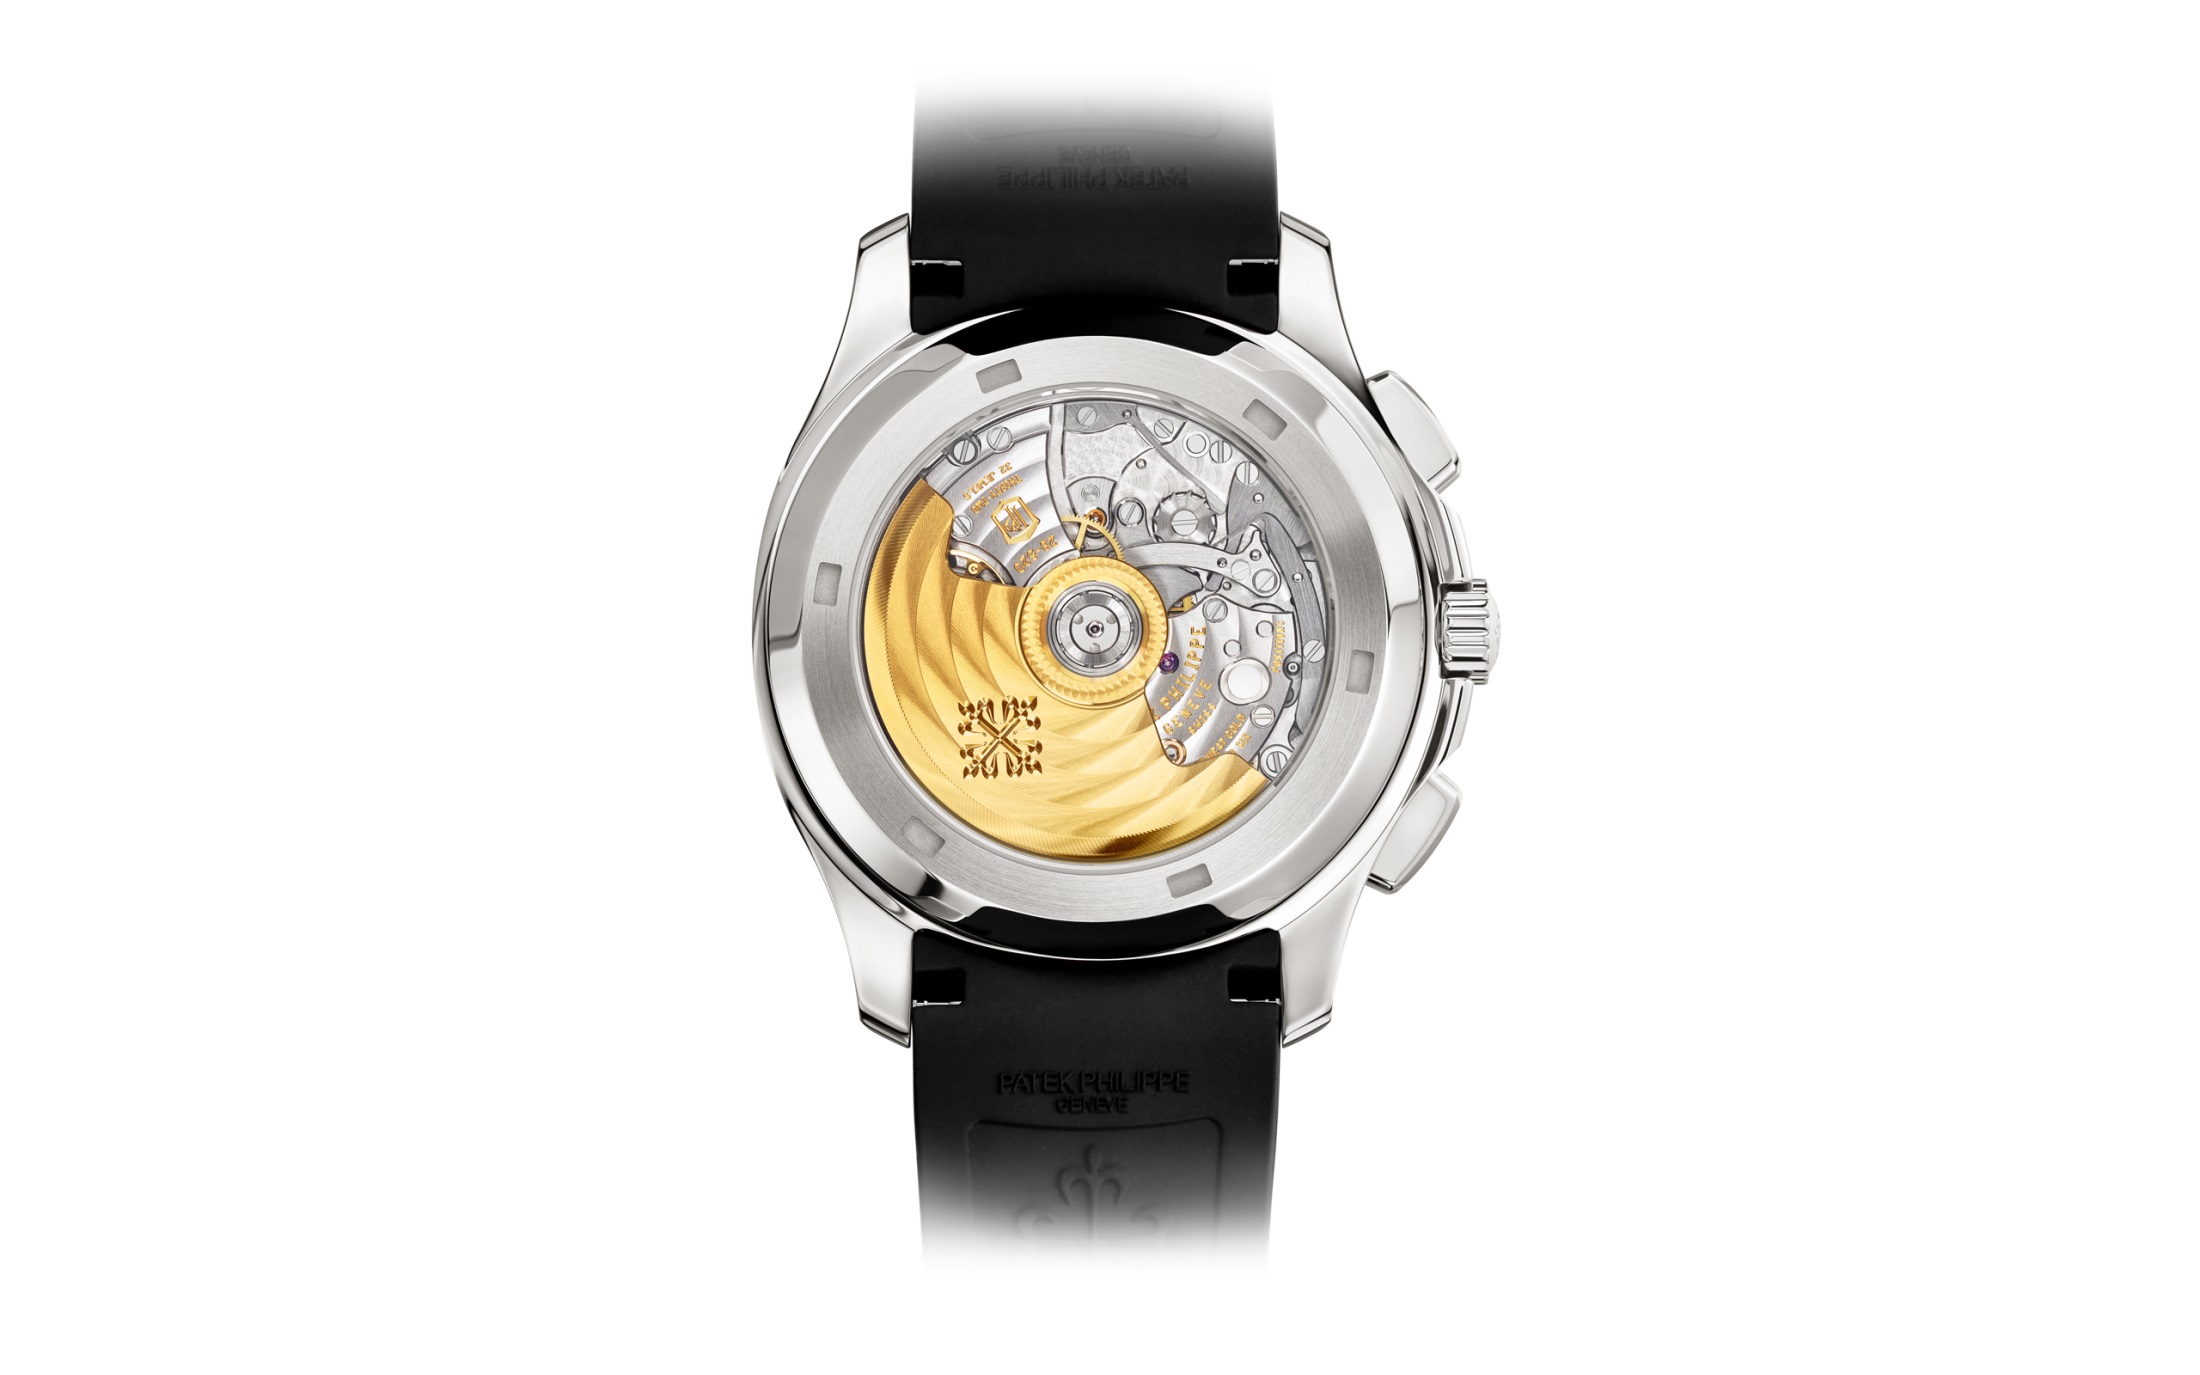 The delicacy of the movement could be viewed through the transparent sapphire crystal caseback.